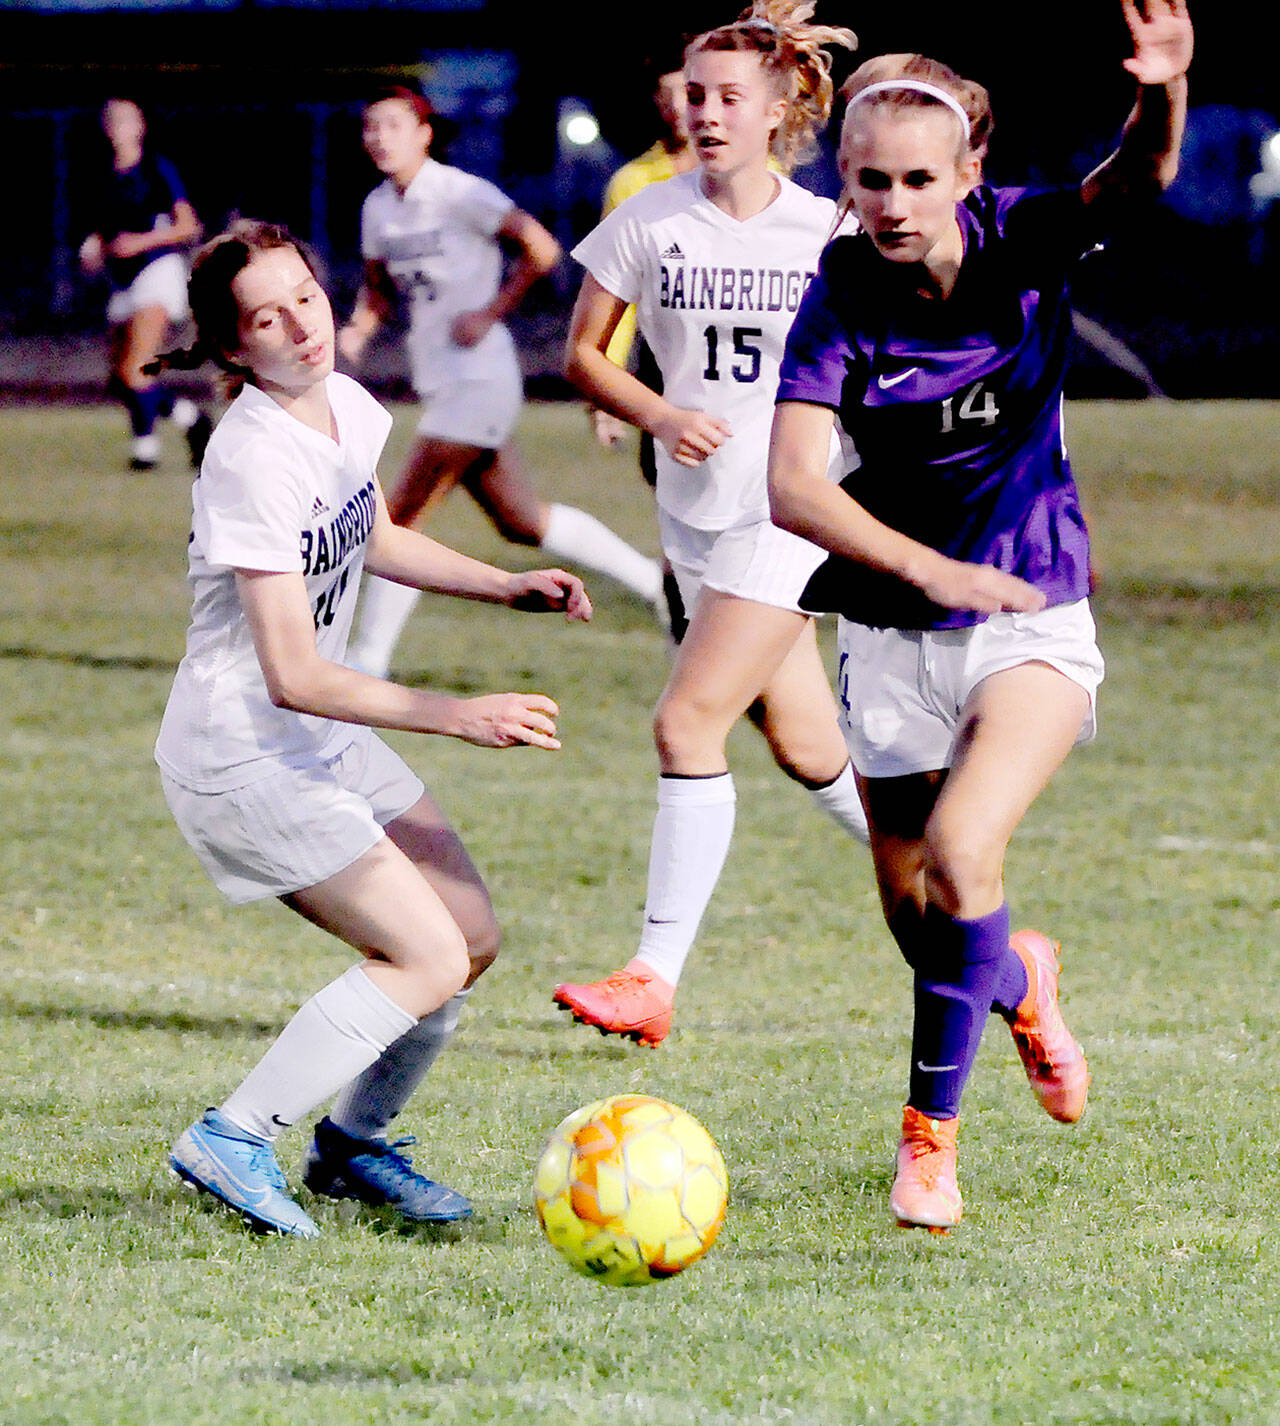 Sequim’s Hannah Wagner, right, advances the ball up field during match with Bainbridge on Tuesday. Wagner scored a goal in the Wolves’ 1-1 (4-1) penalty kick shootout loss to the Spartans. (Michael Dashiell/Olympic Peninsula News Group)